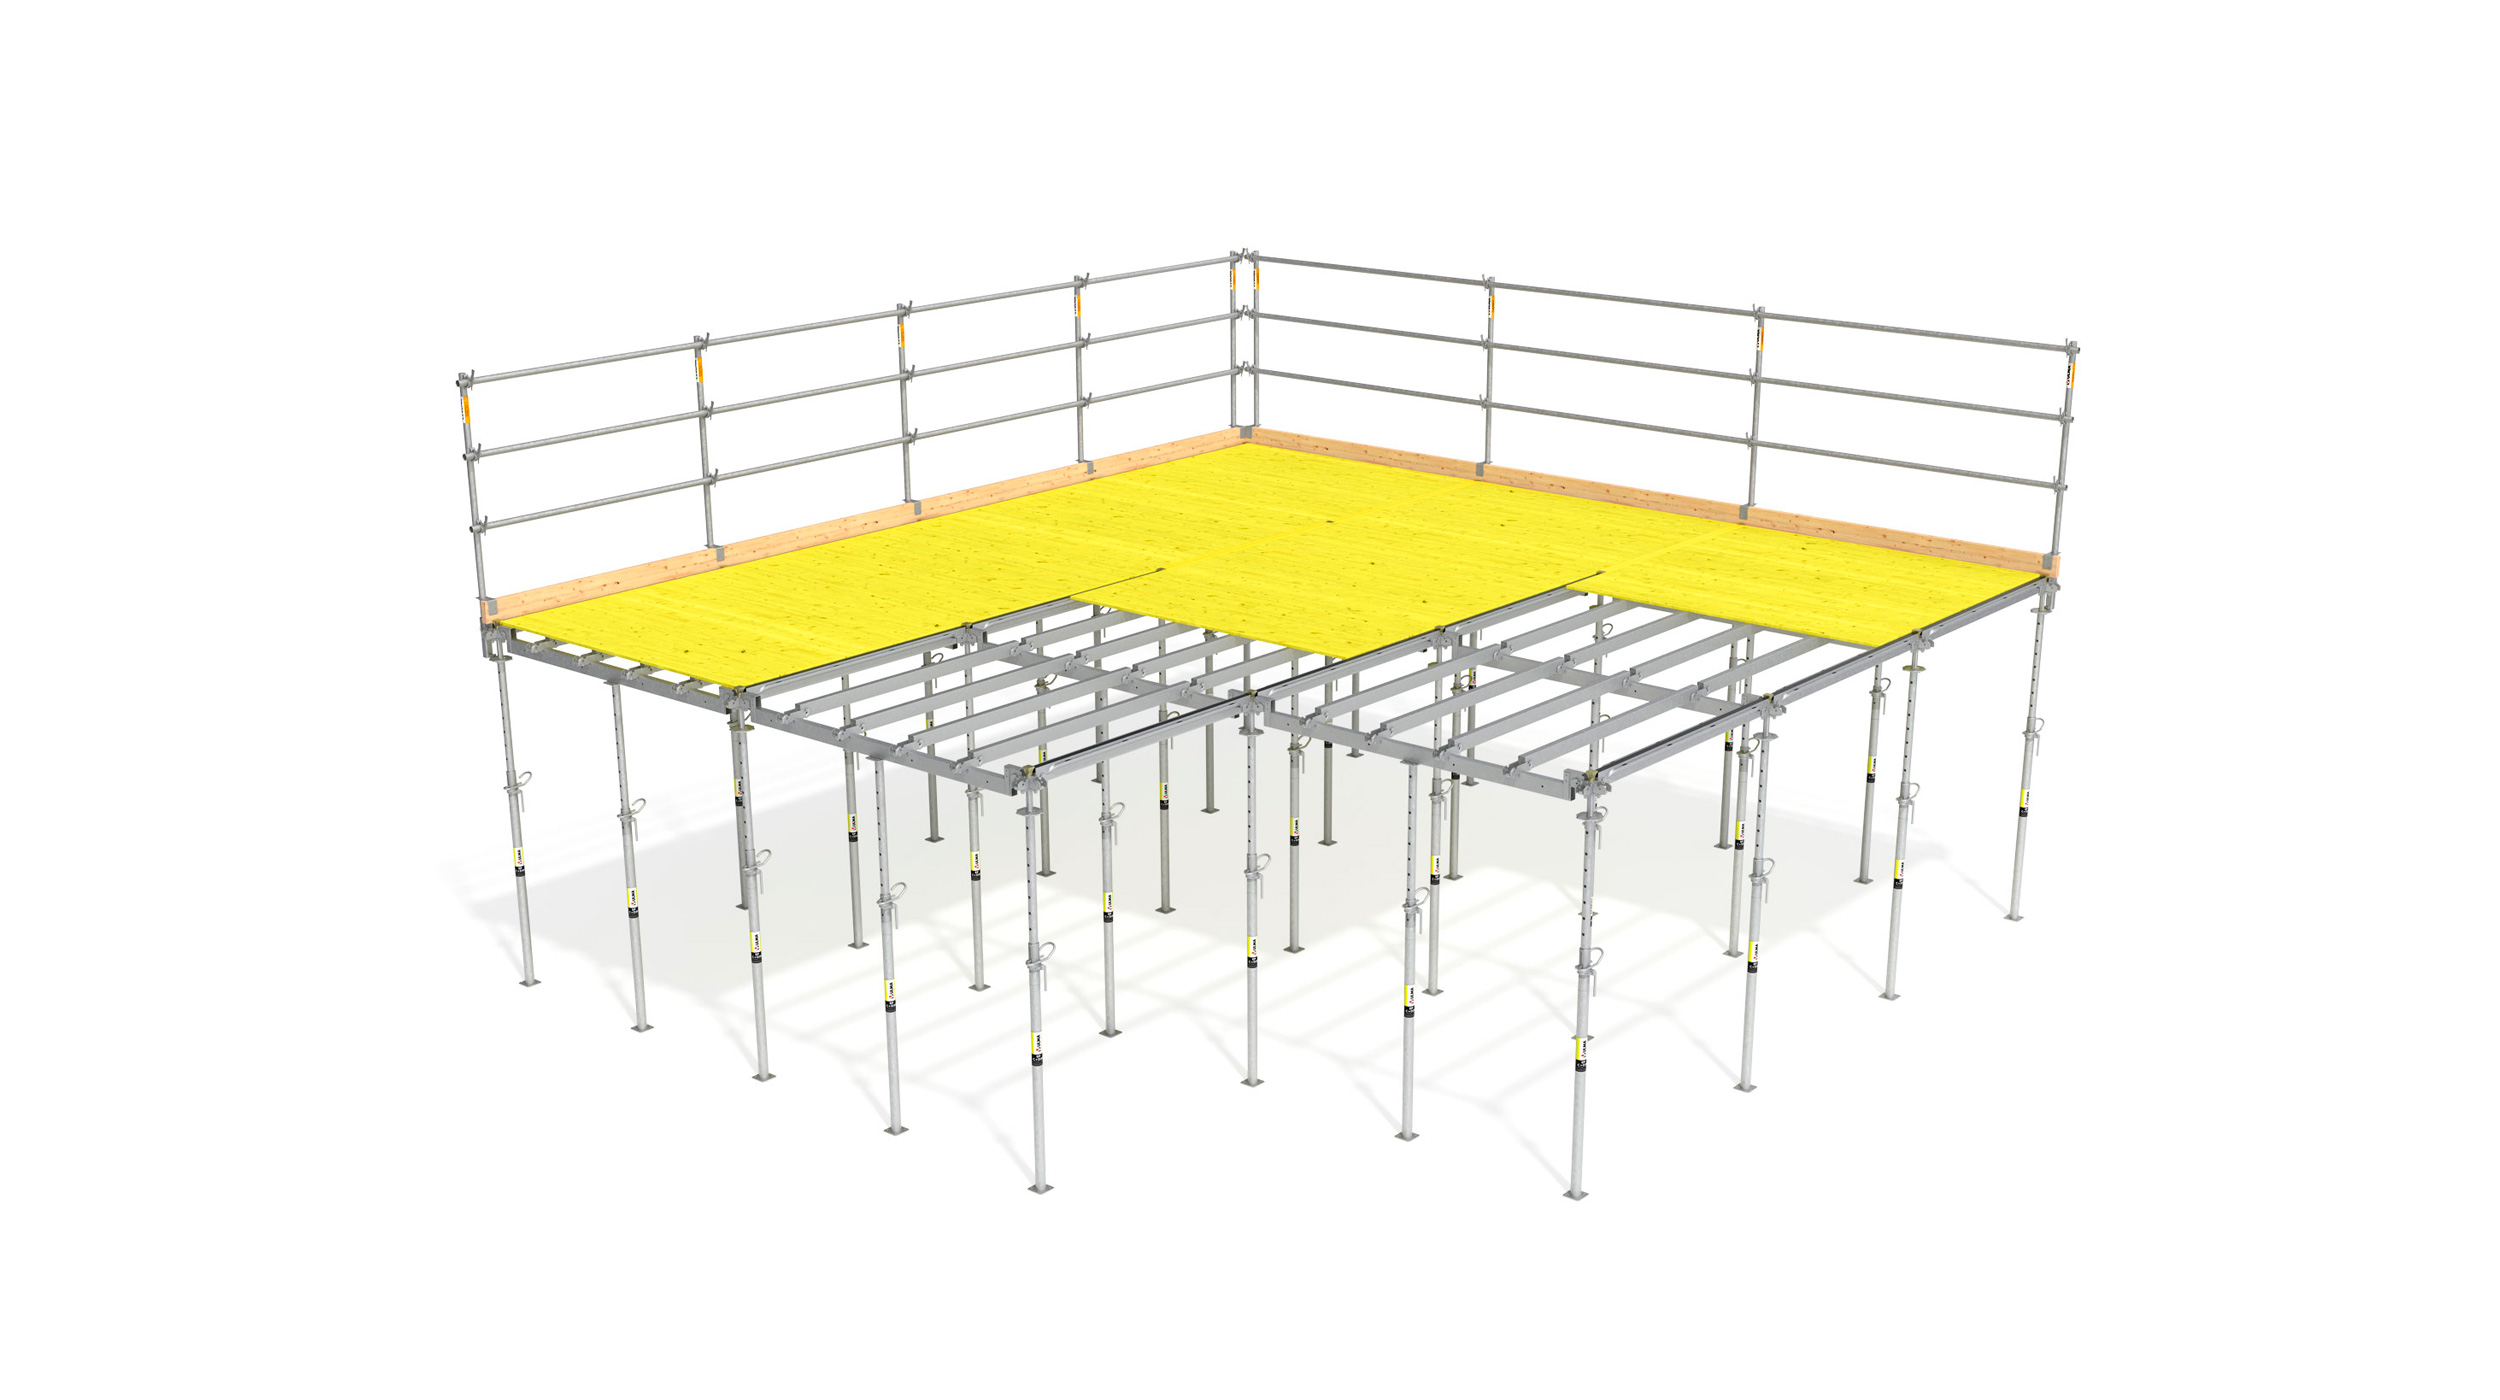 Fast and safe formwork that provides high performance rates on site. A new era in forming decks, a formwork system with both modular and flexible systems’ advantages all in one.